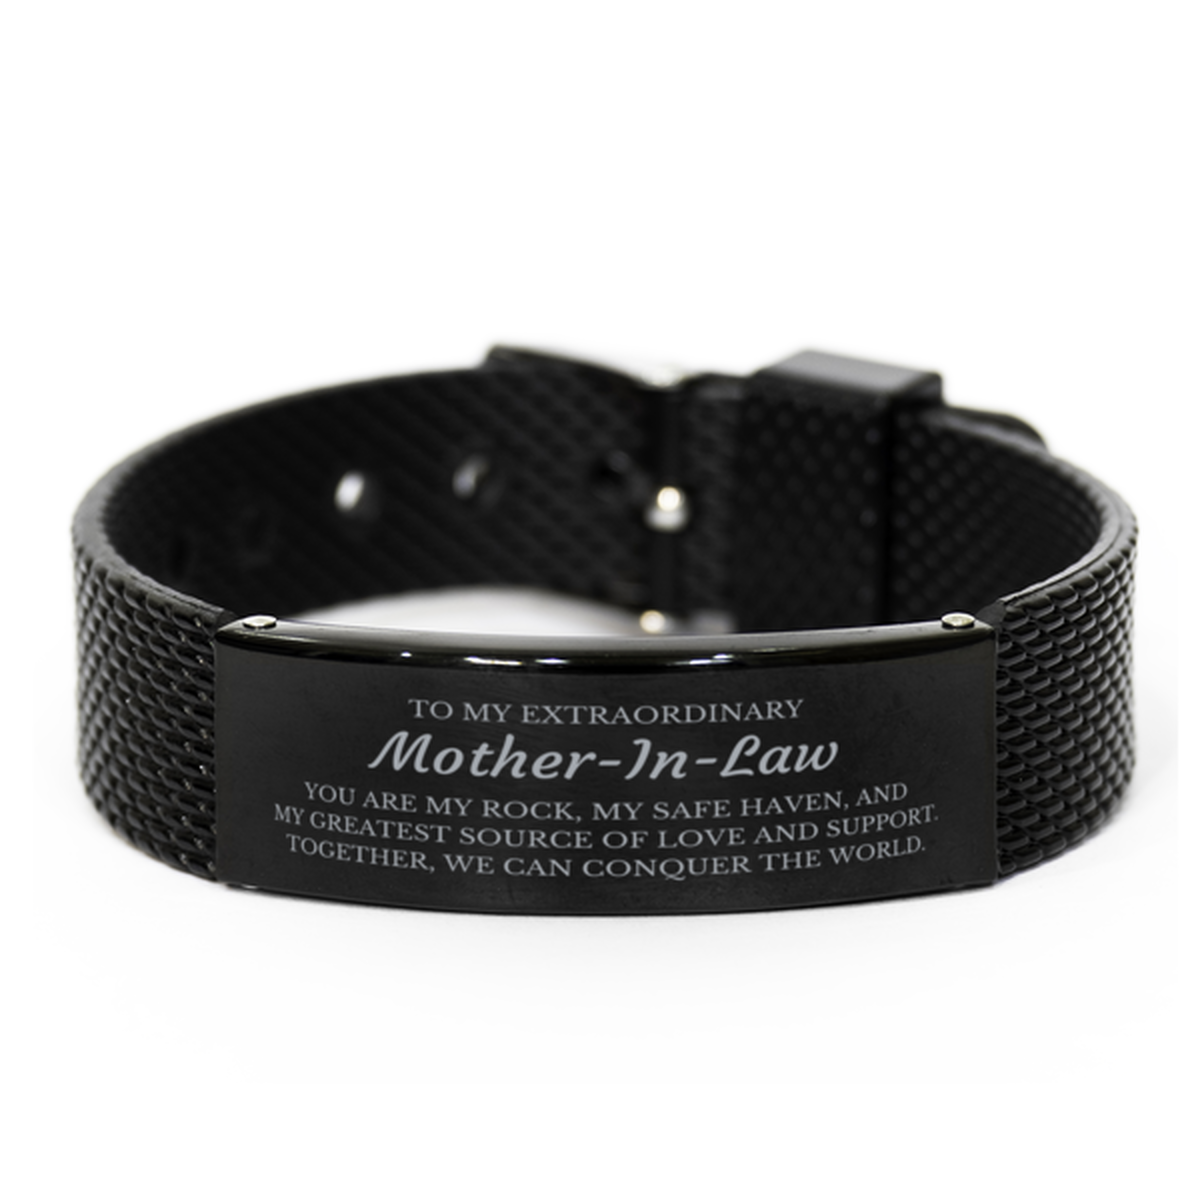 To My Extraordinary Mother-In-Law Gifts, Together, we can conquer the world, Birthday Black Shark Mesh Bracelet For Mother-In-Law, Christmas Gifts For Mother-In-Law